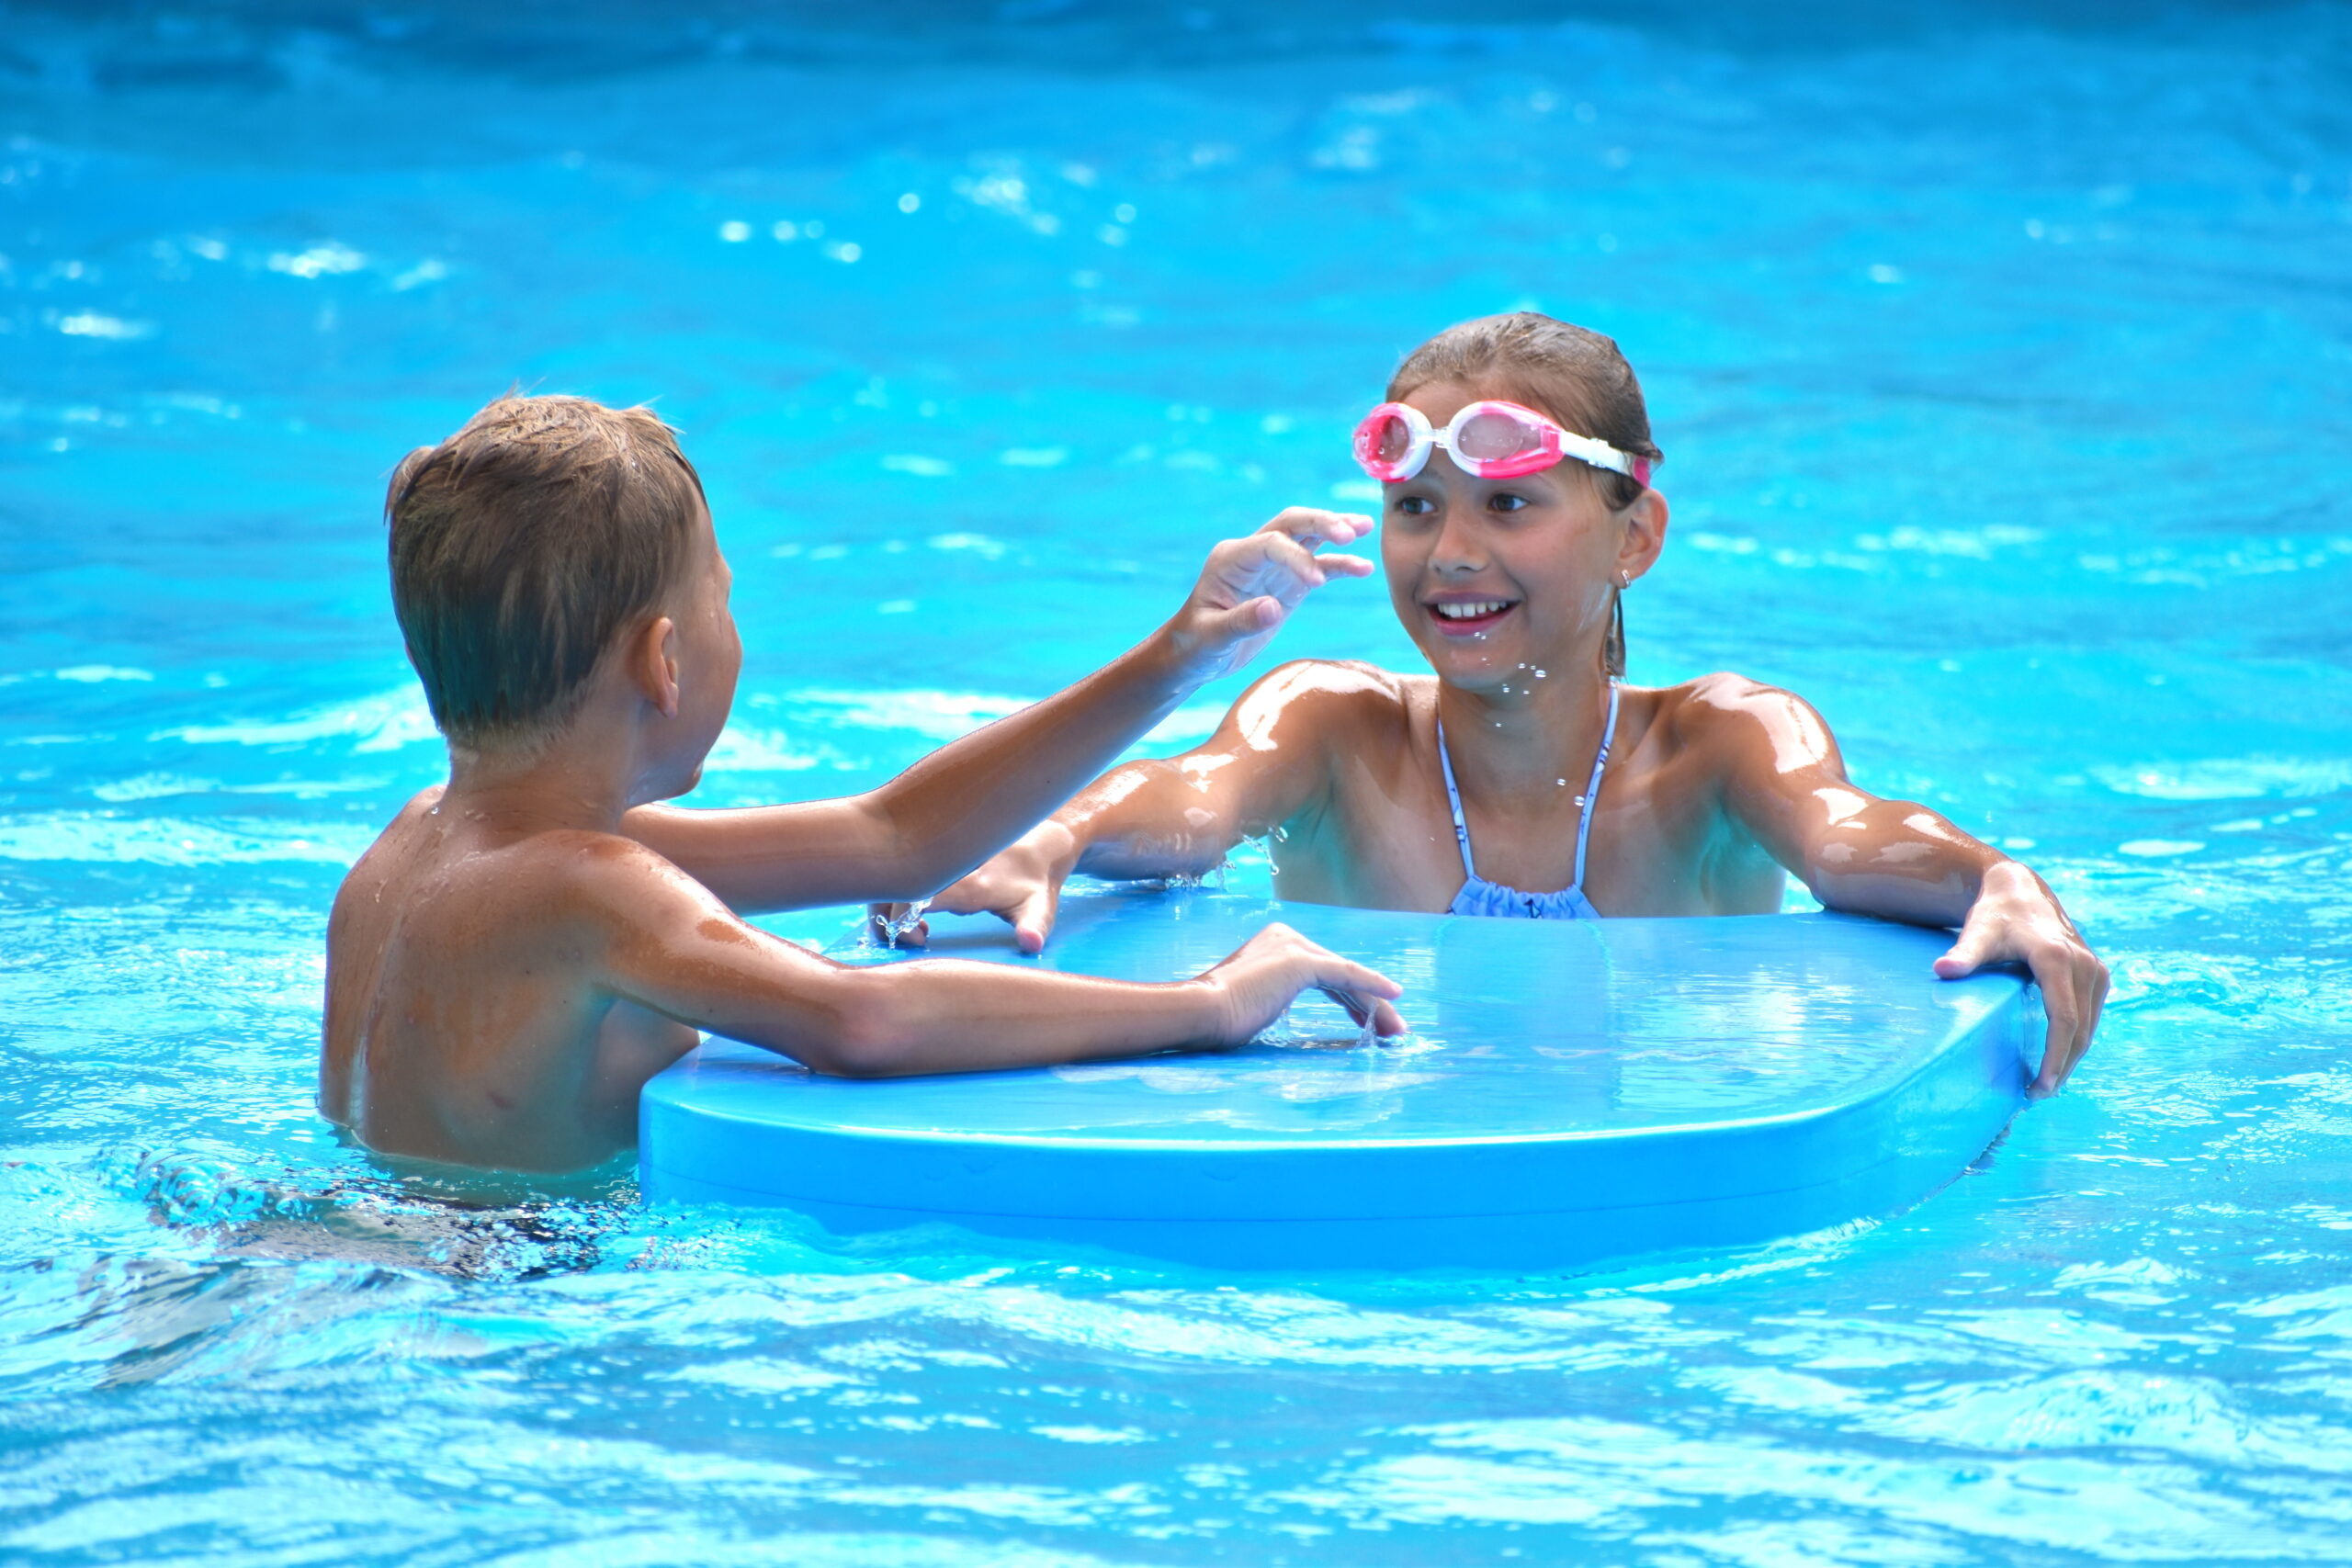 A boy and a girl engaged in a pool game